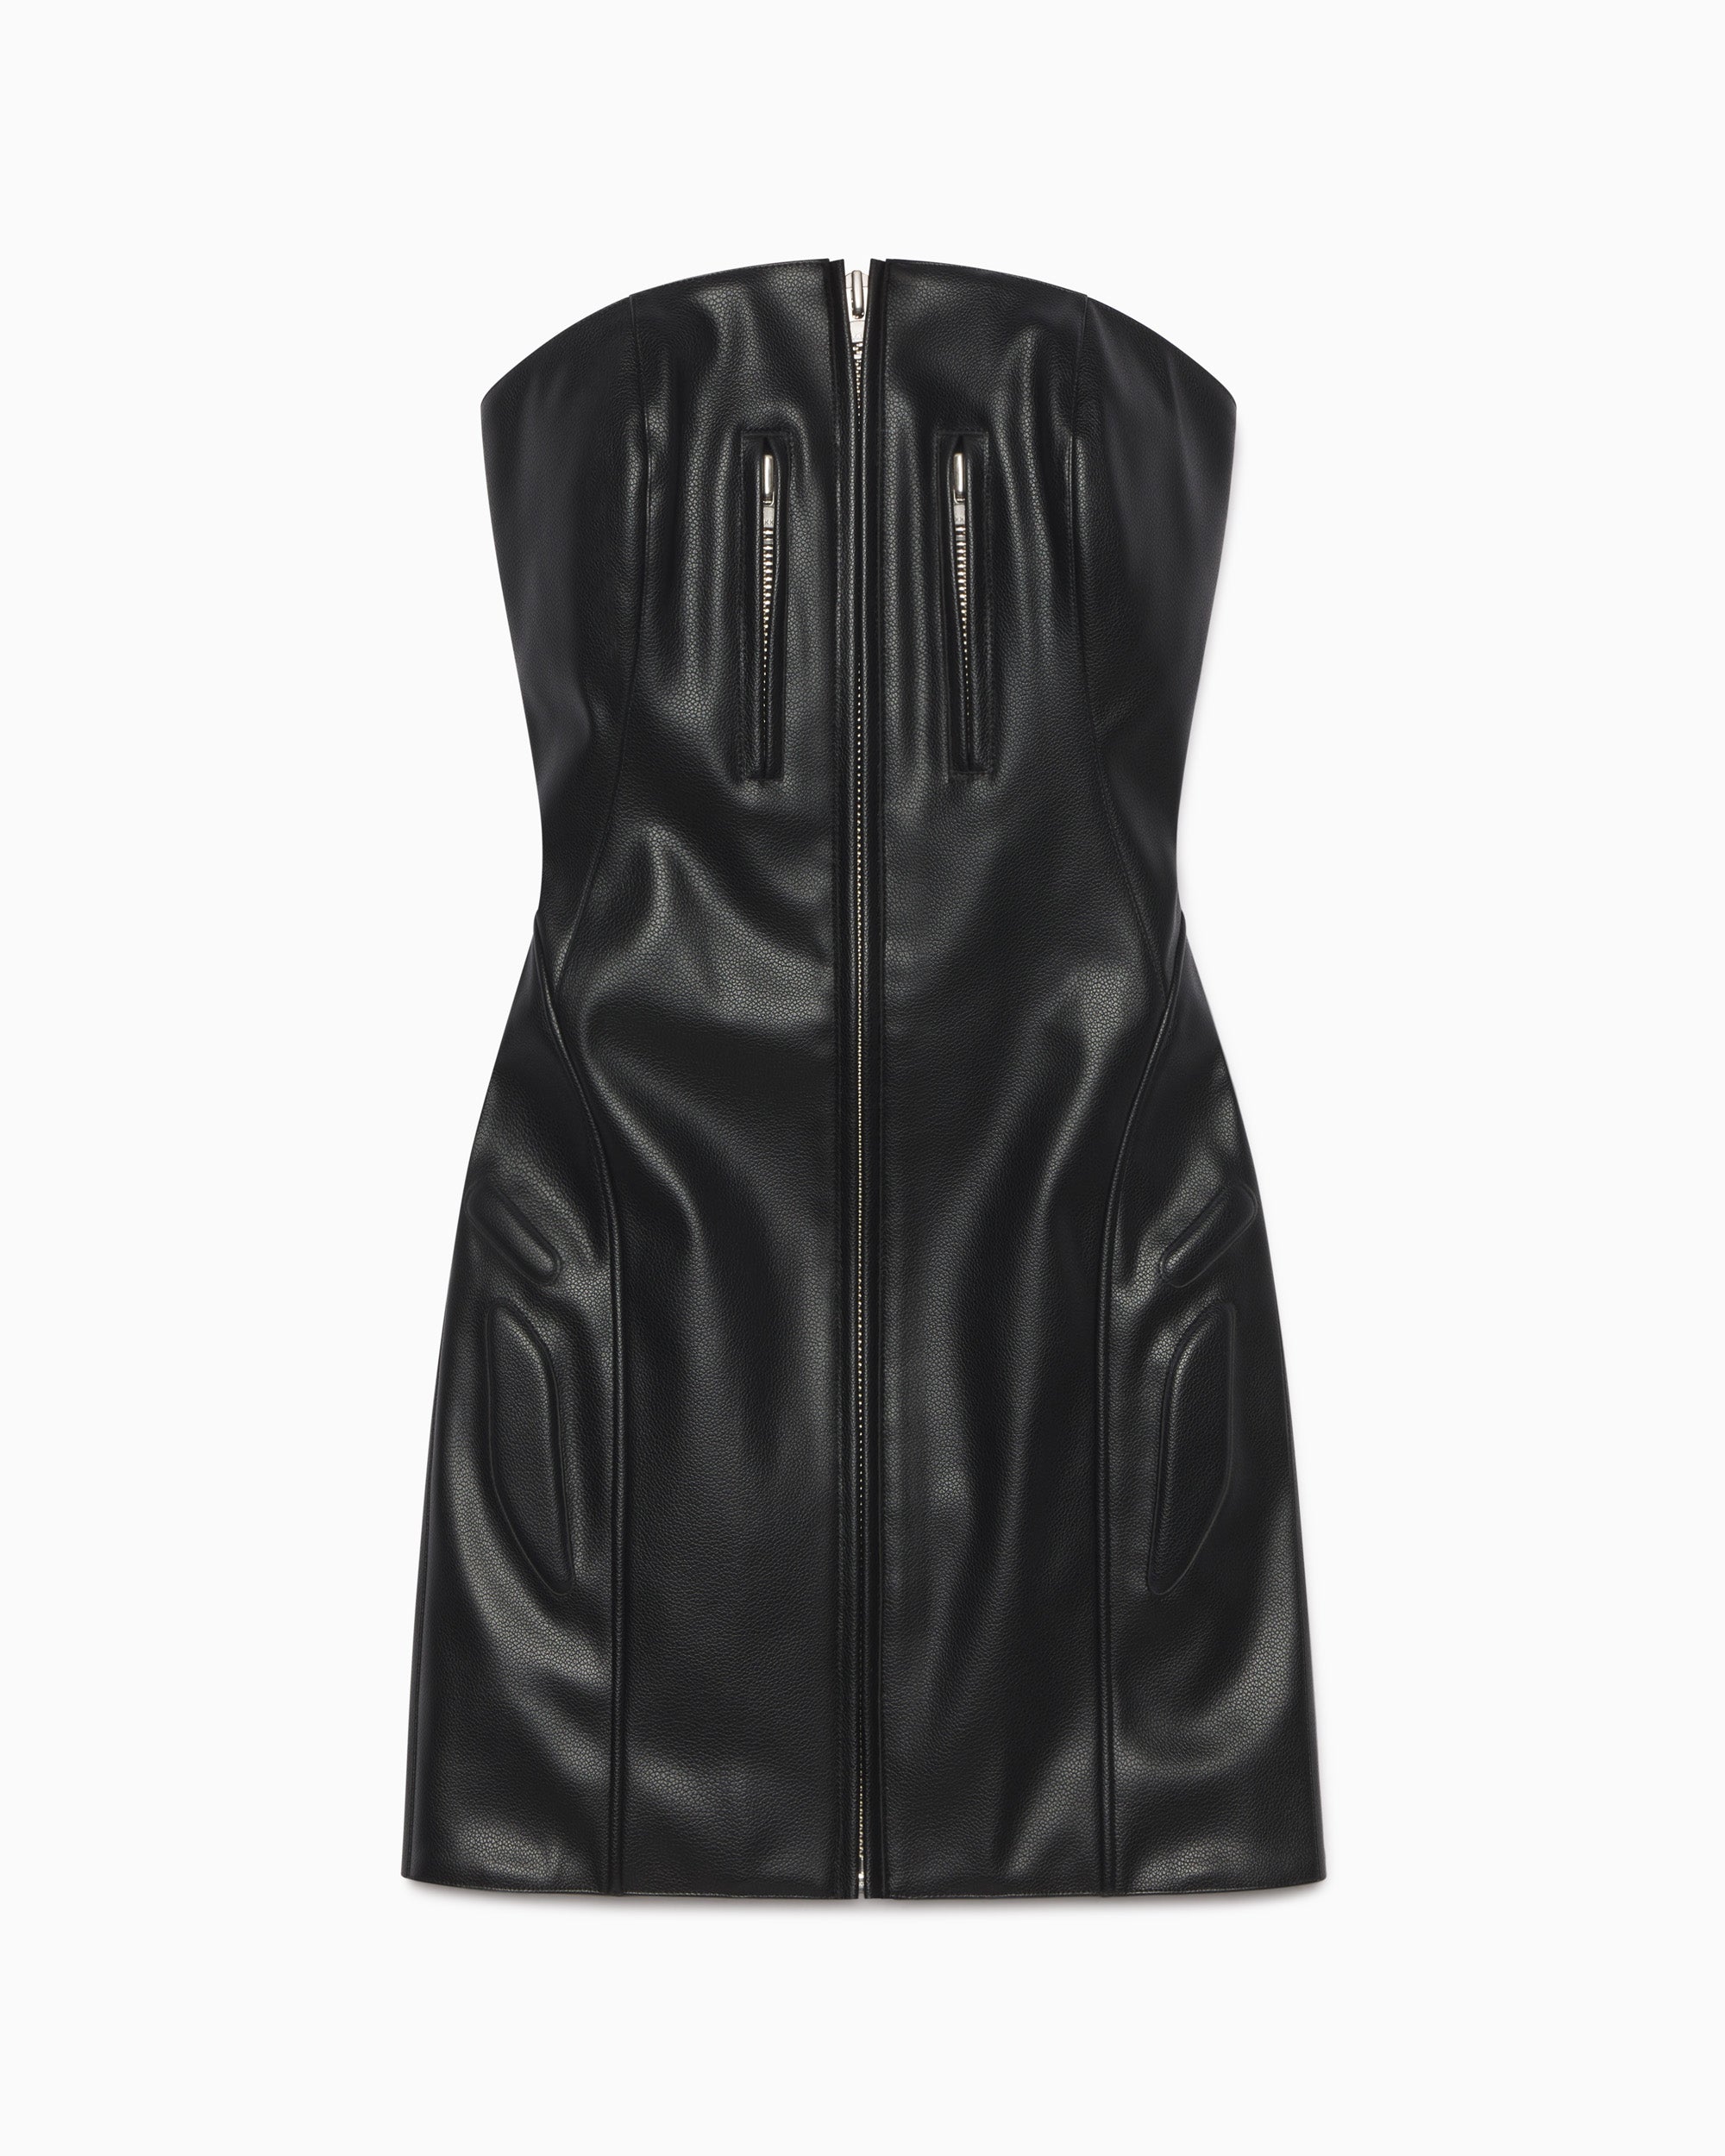 C K Black Leather Dress, Mini Dress, Leather, With Hook and Loop Tape and  Skinprotection, Very Shiny, Pleather, Handmade, New 